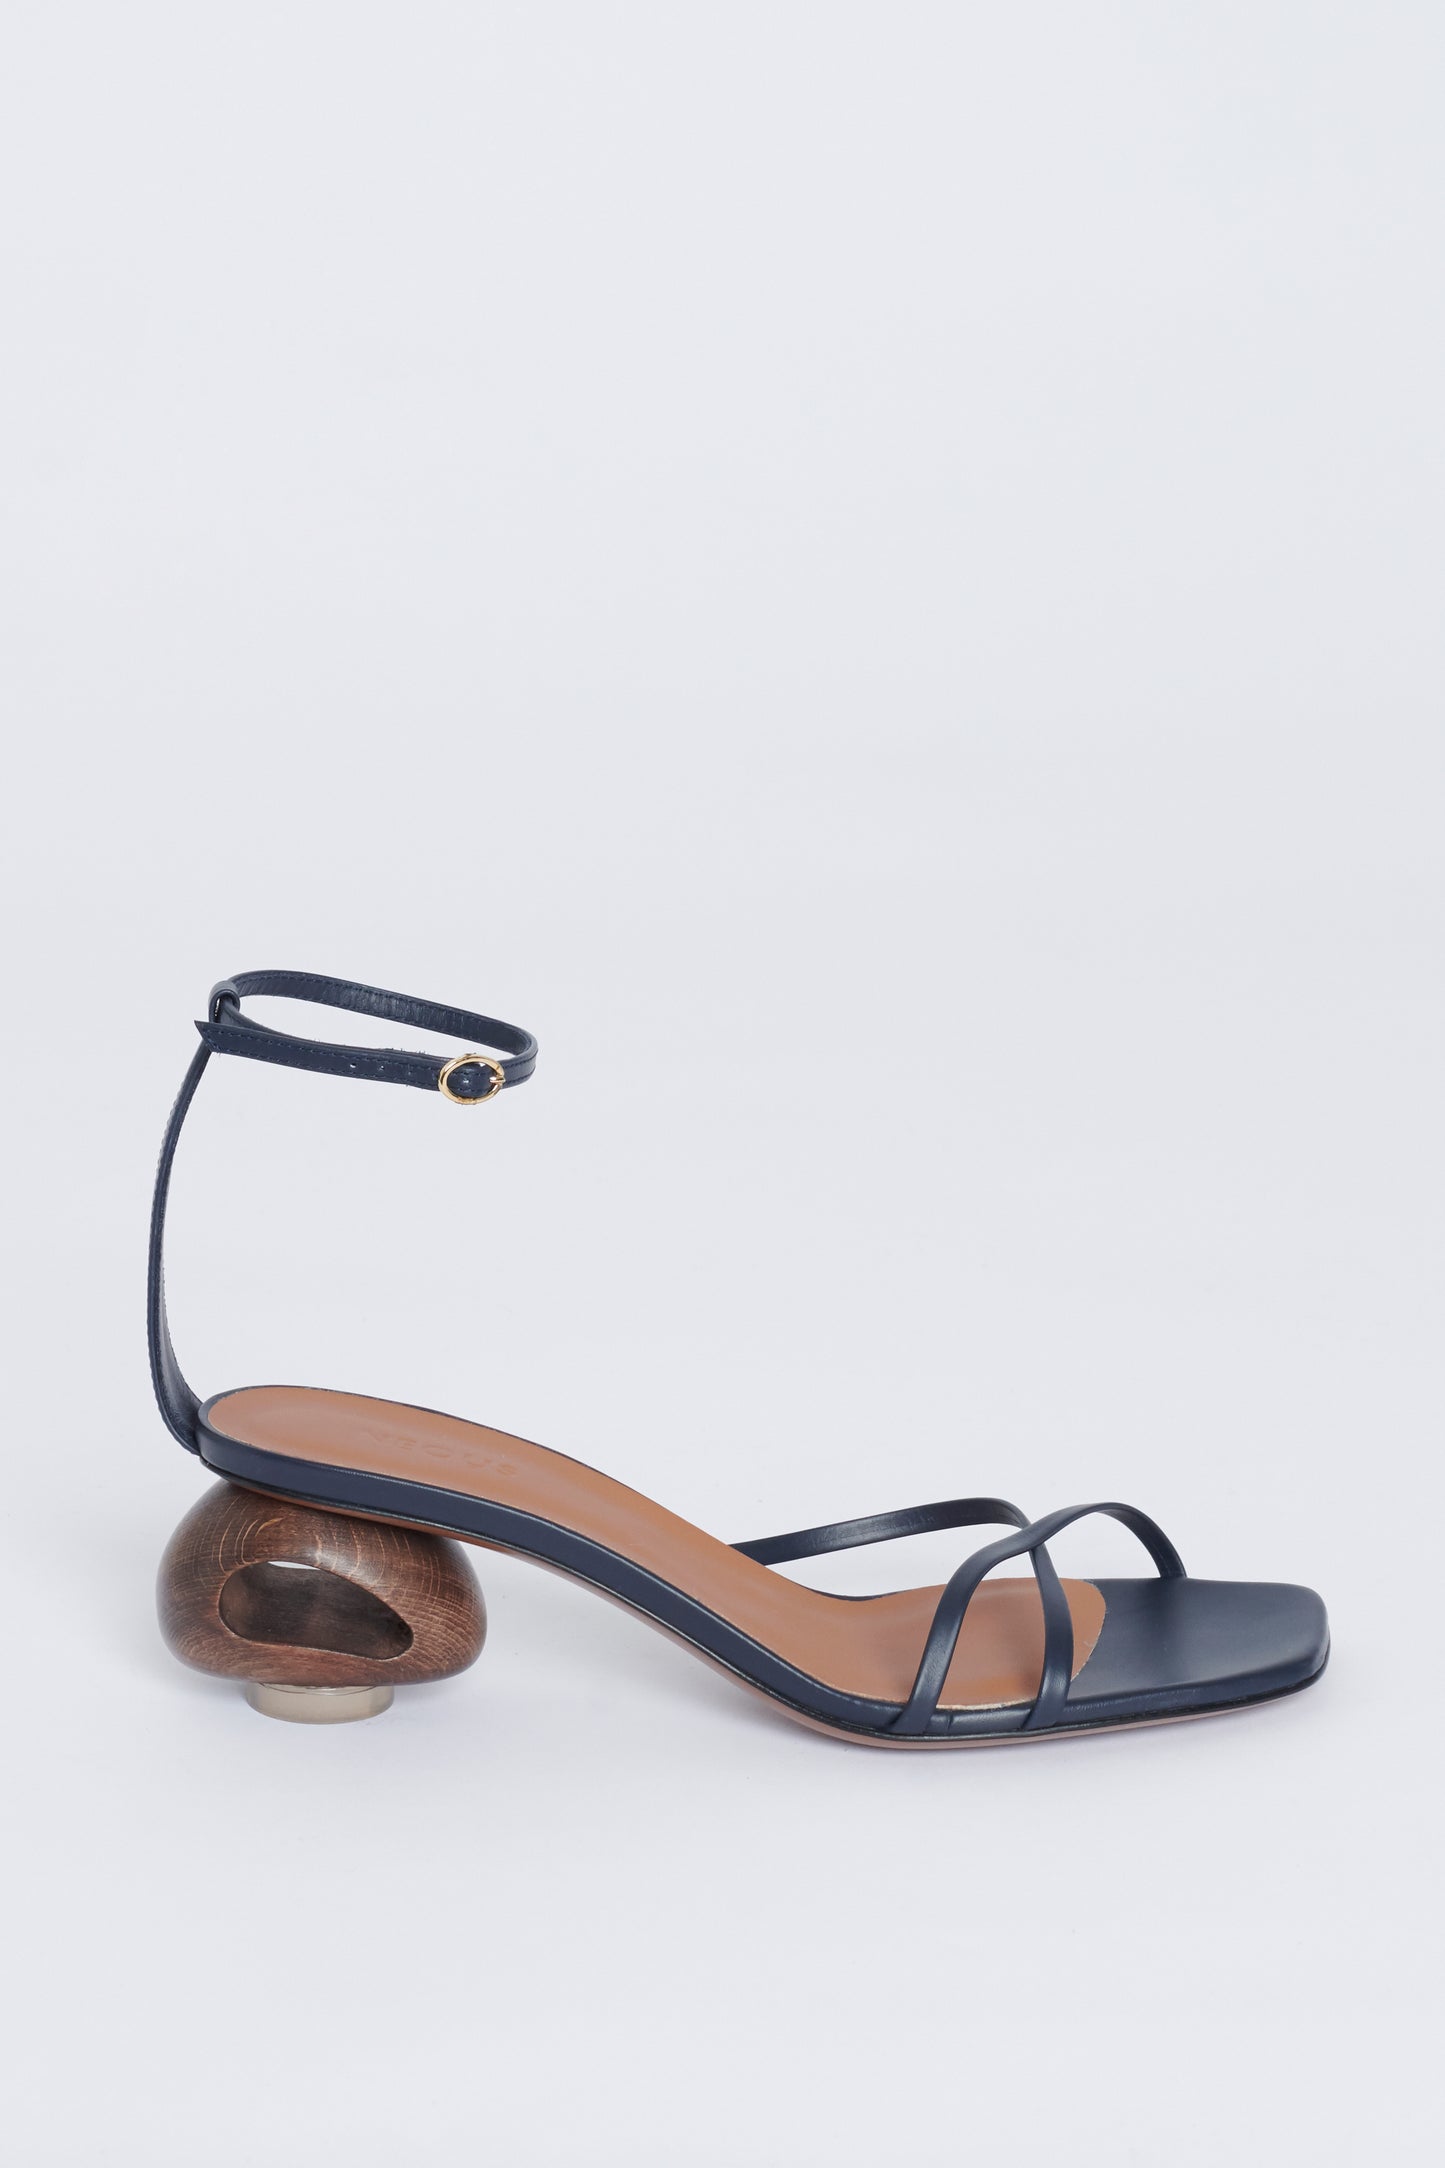 Navy Blue Leather Ankle Strap Preowned Heeled Sandals